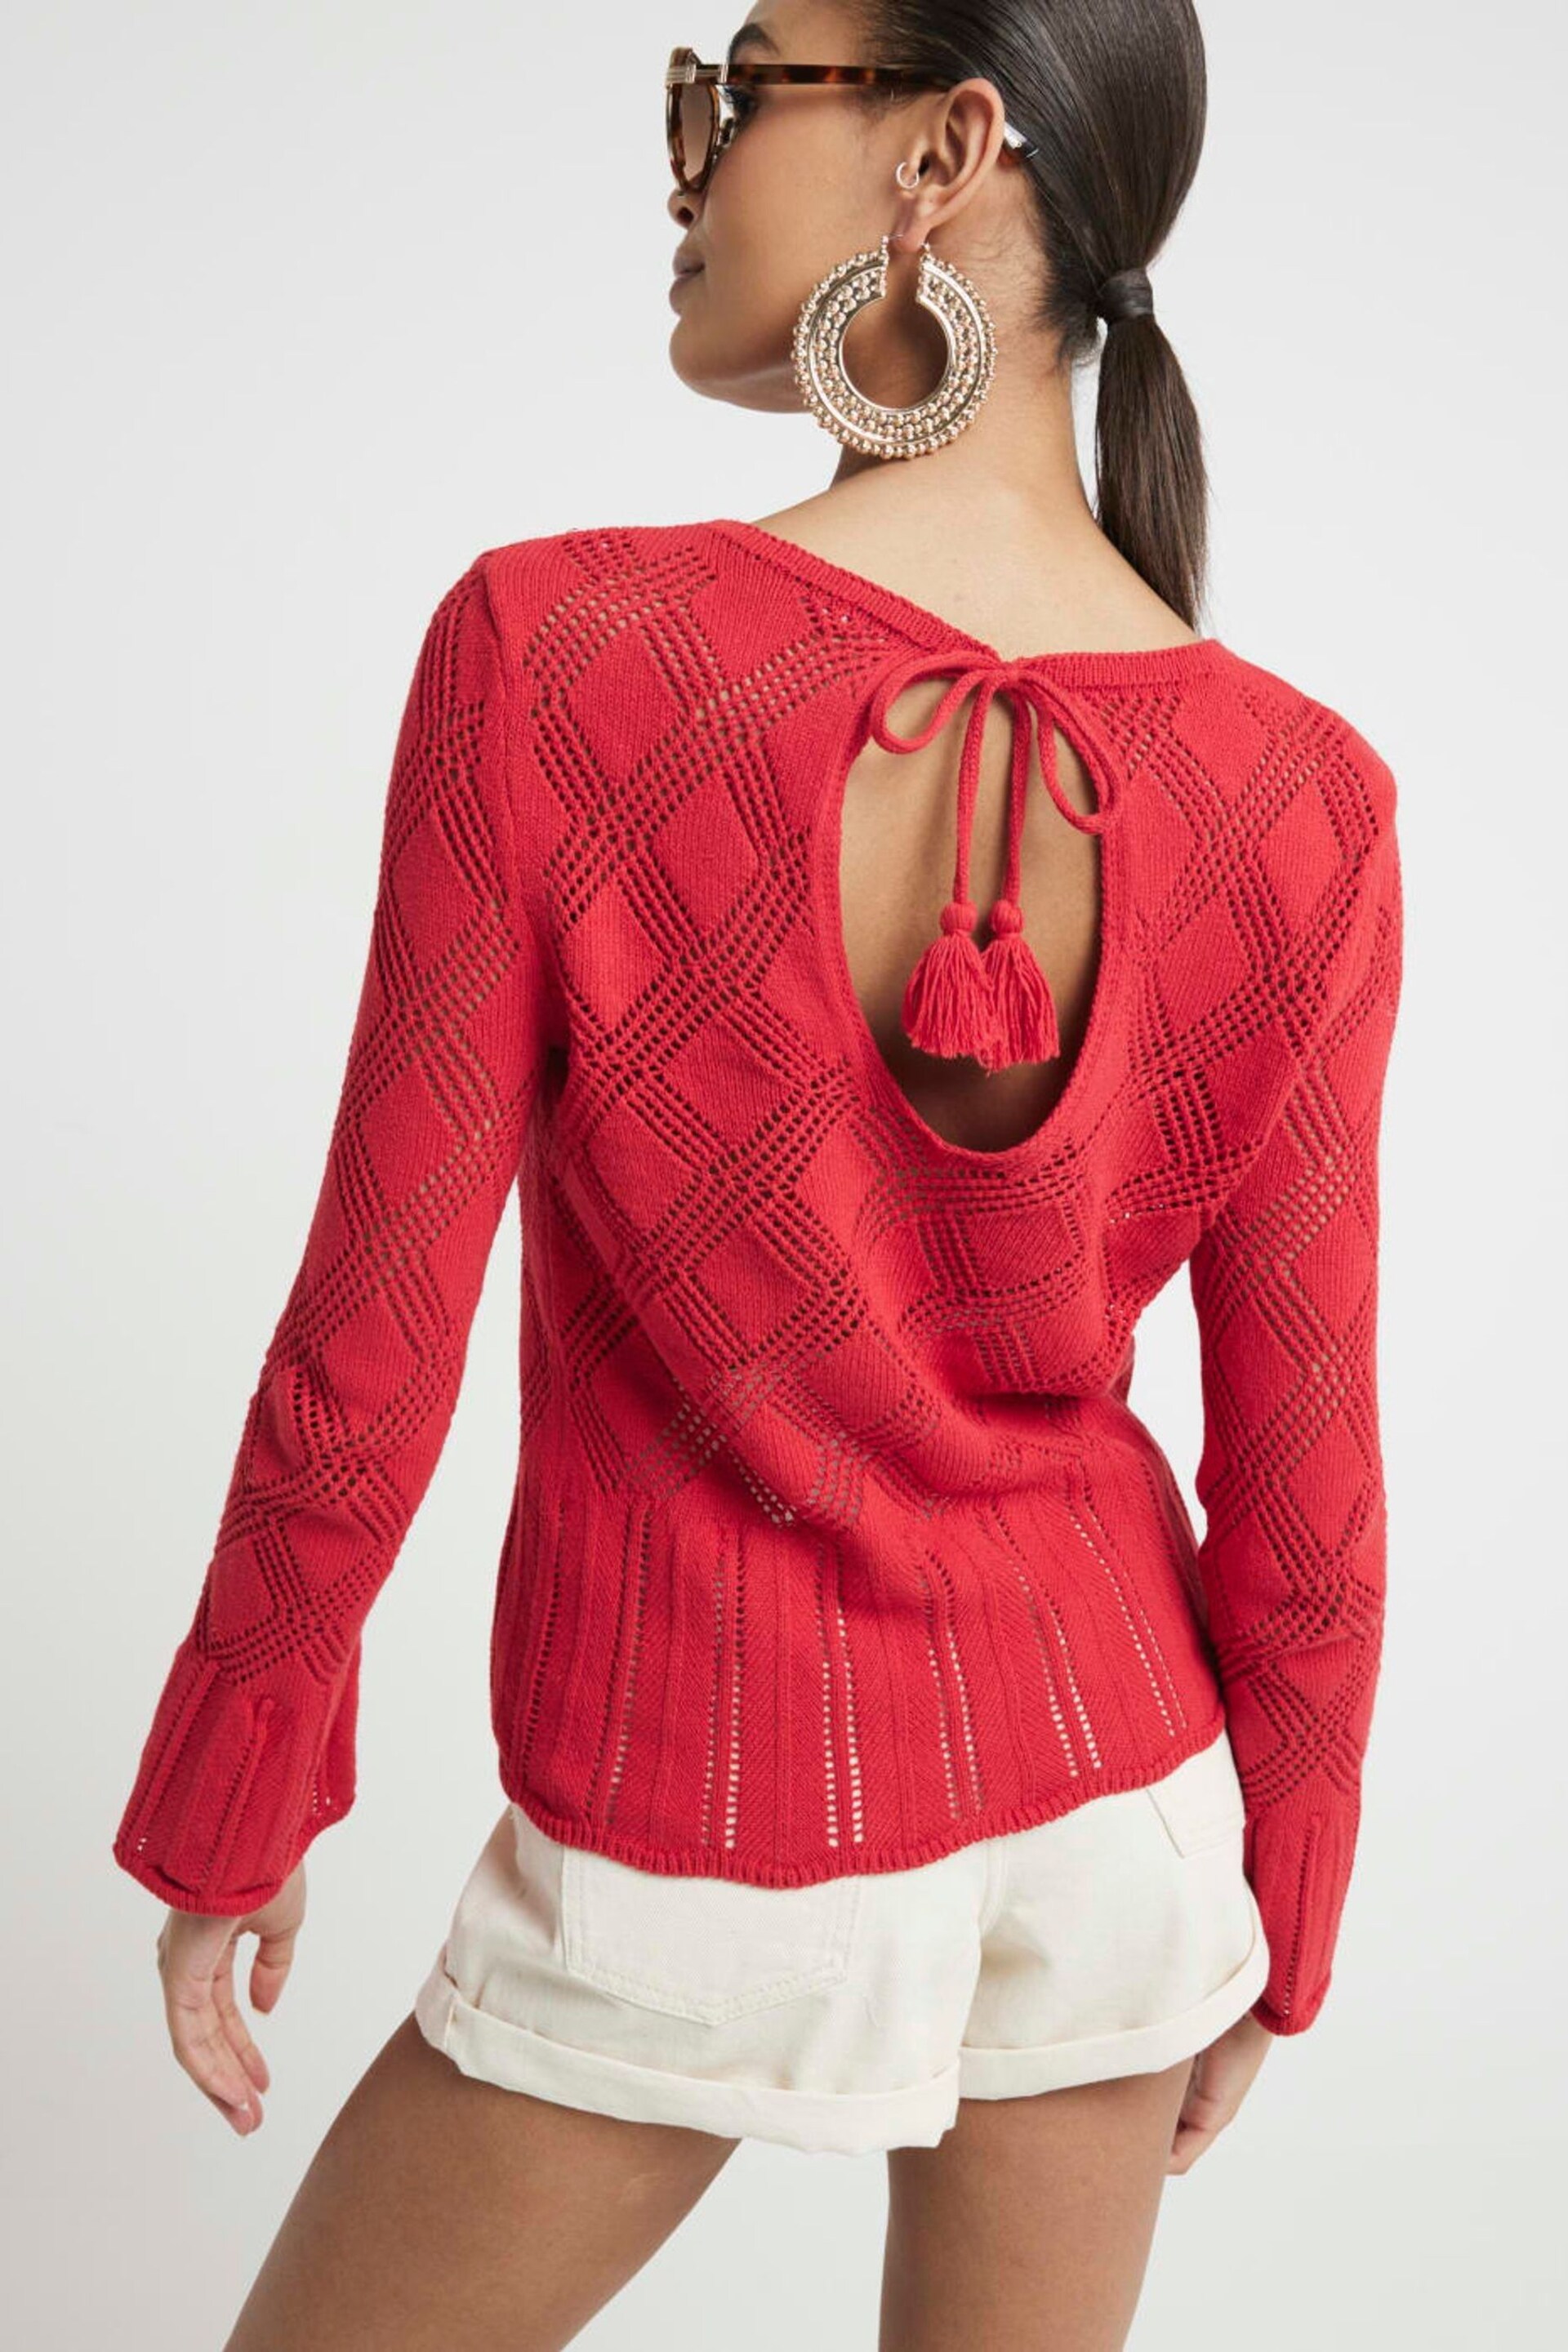 River Island Red Crochet Tie Back Top - Image 2 of 6